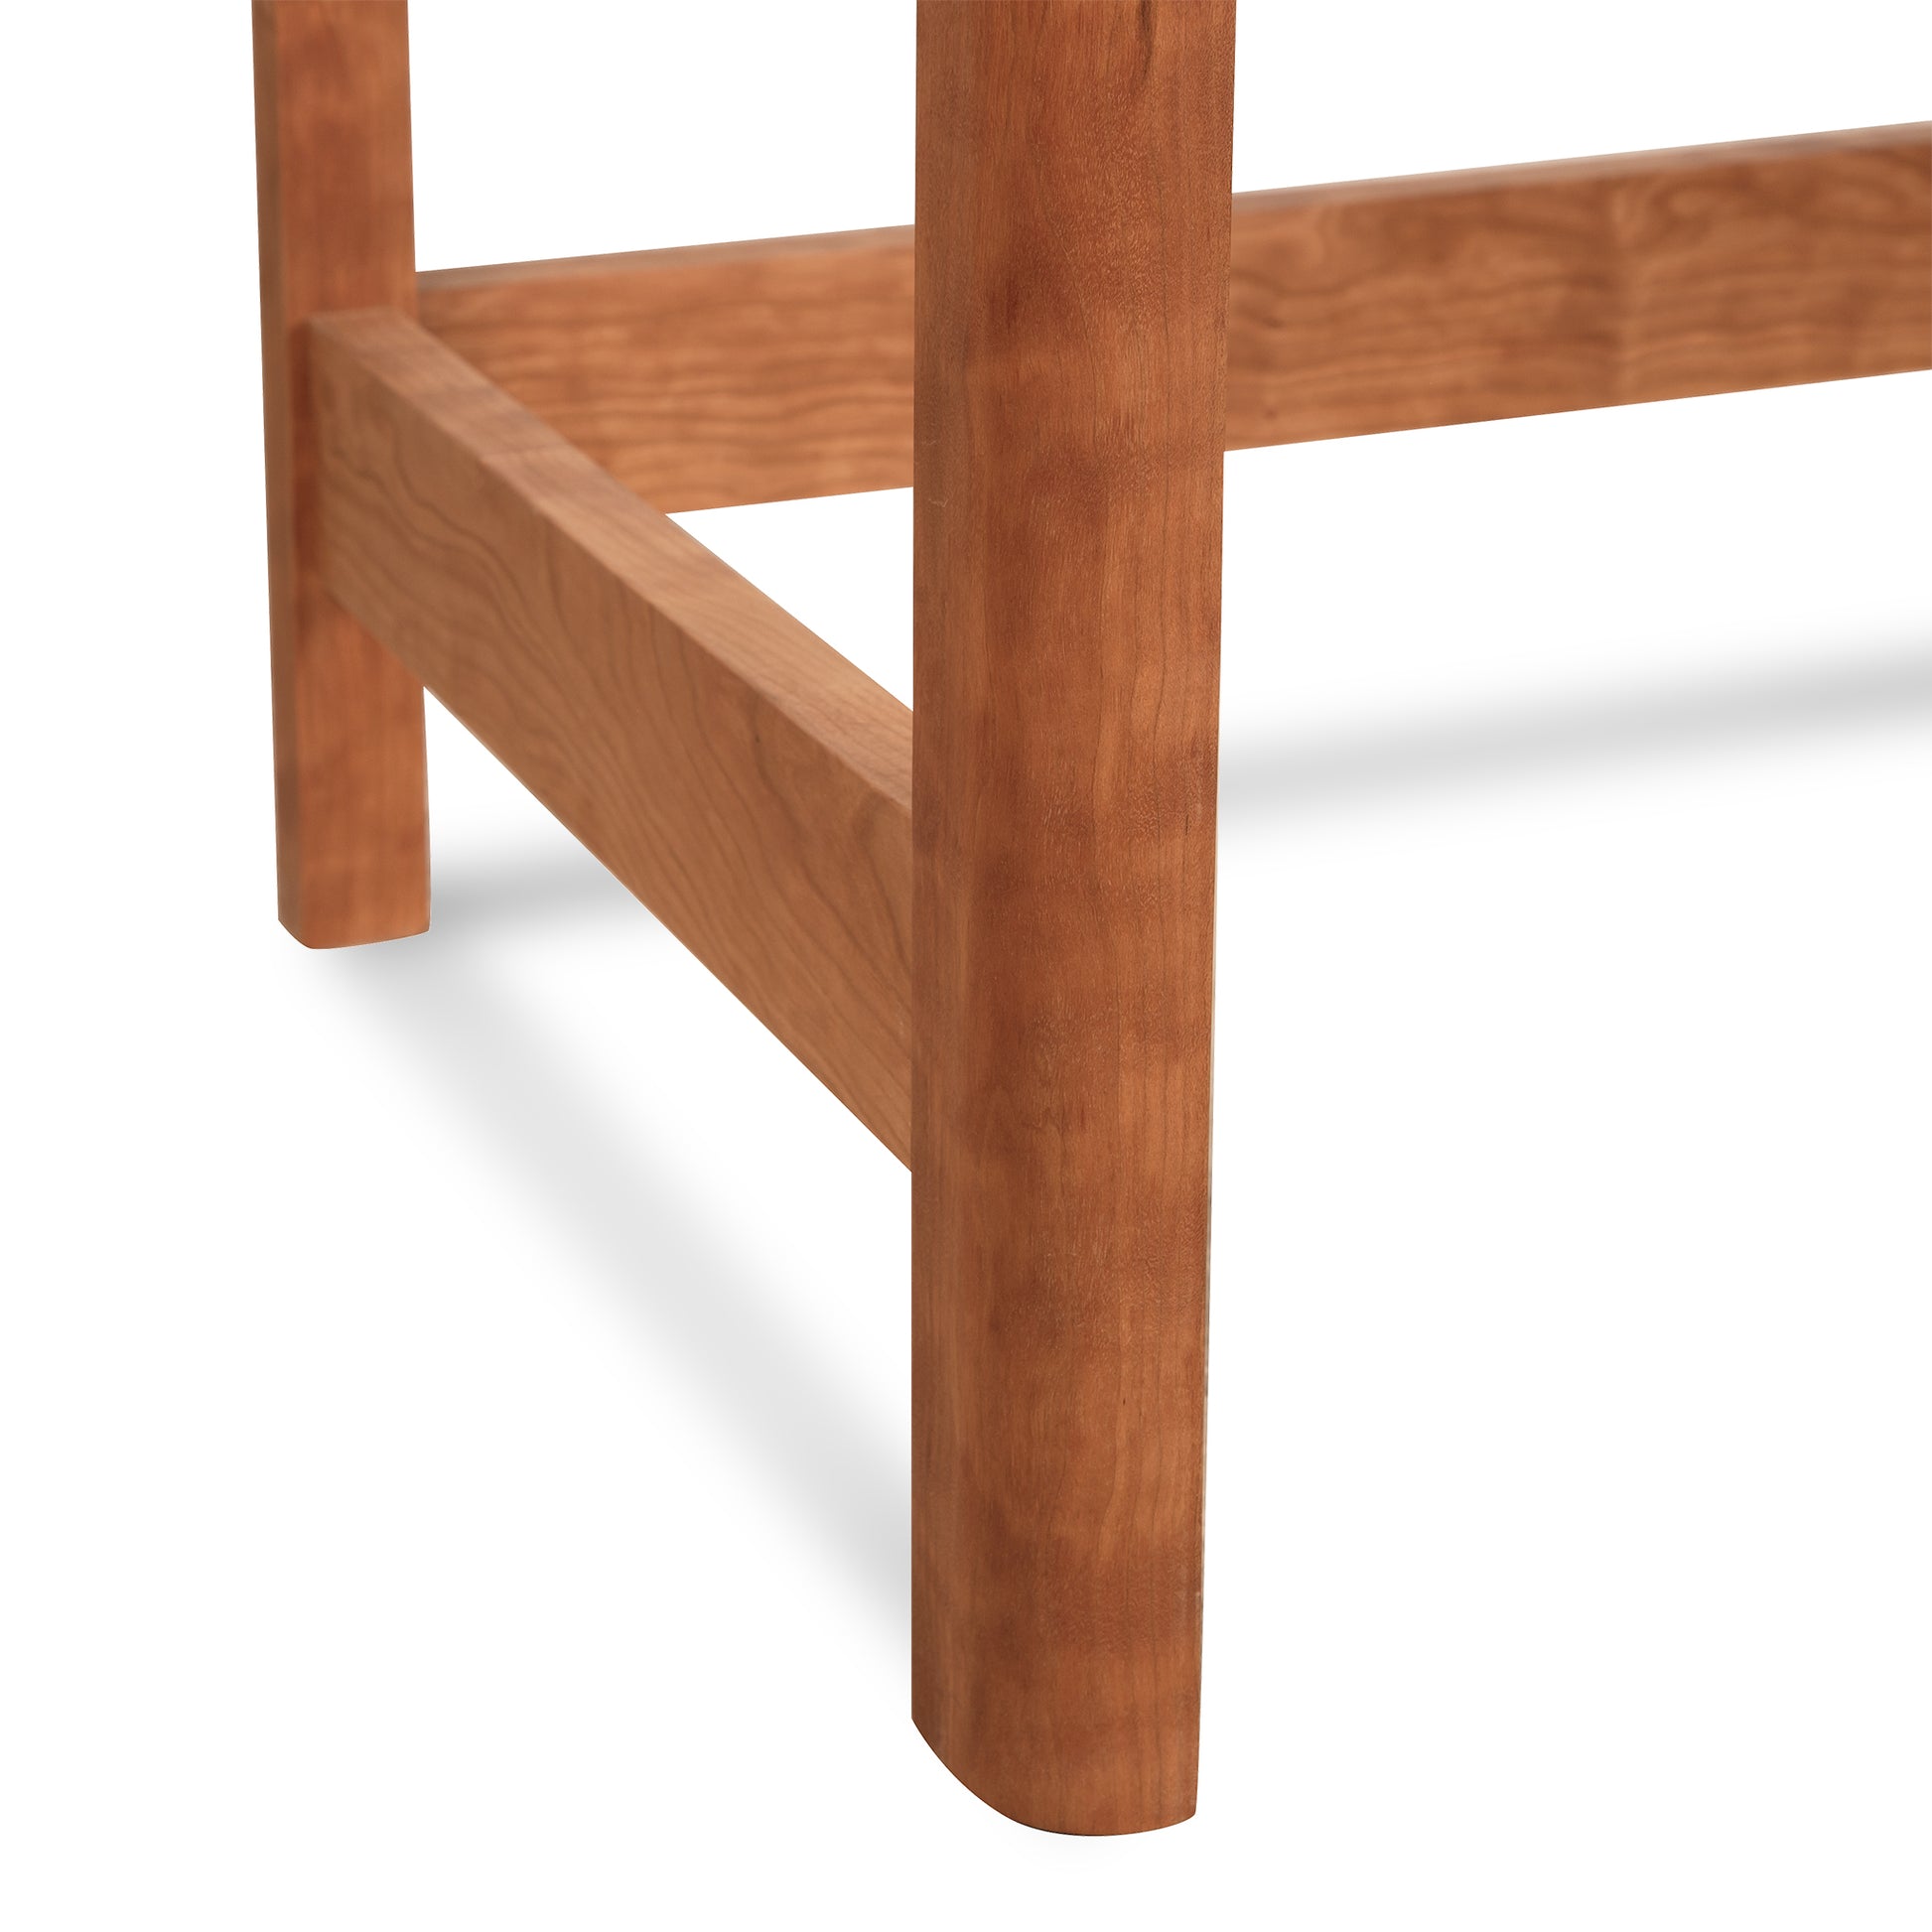 Close-up of a Vermont Furniture Designs Heartwood Shaker writing desk leg and crossbar, showcasing the wood grain and joinery details of sustainable cherry maple walnut.